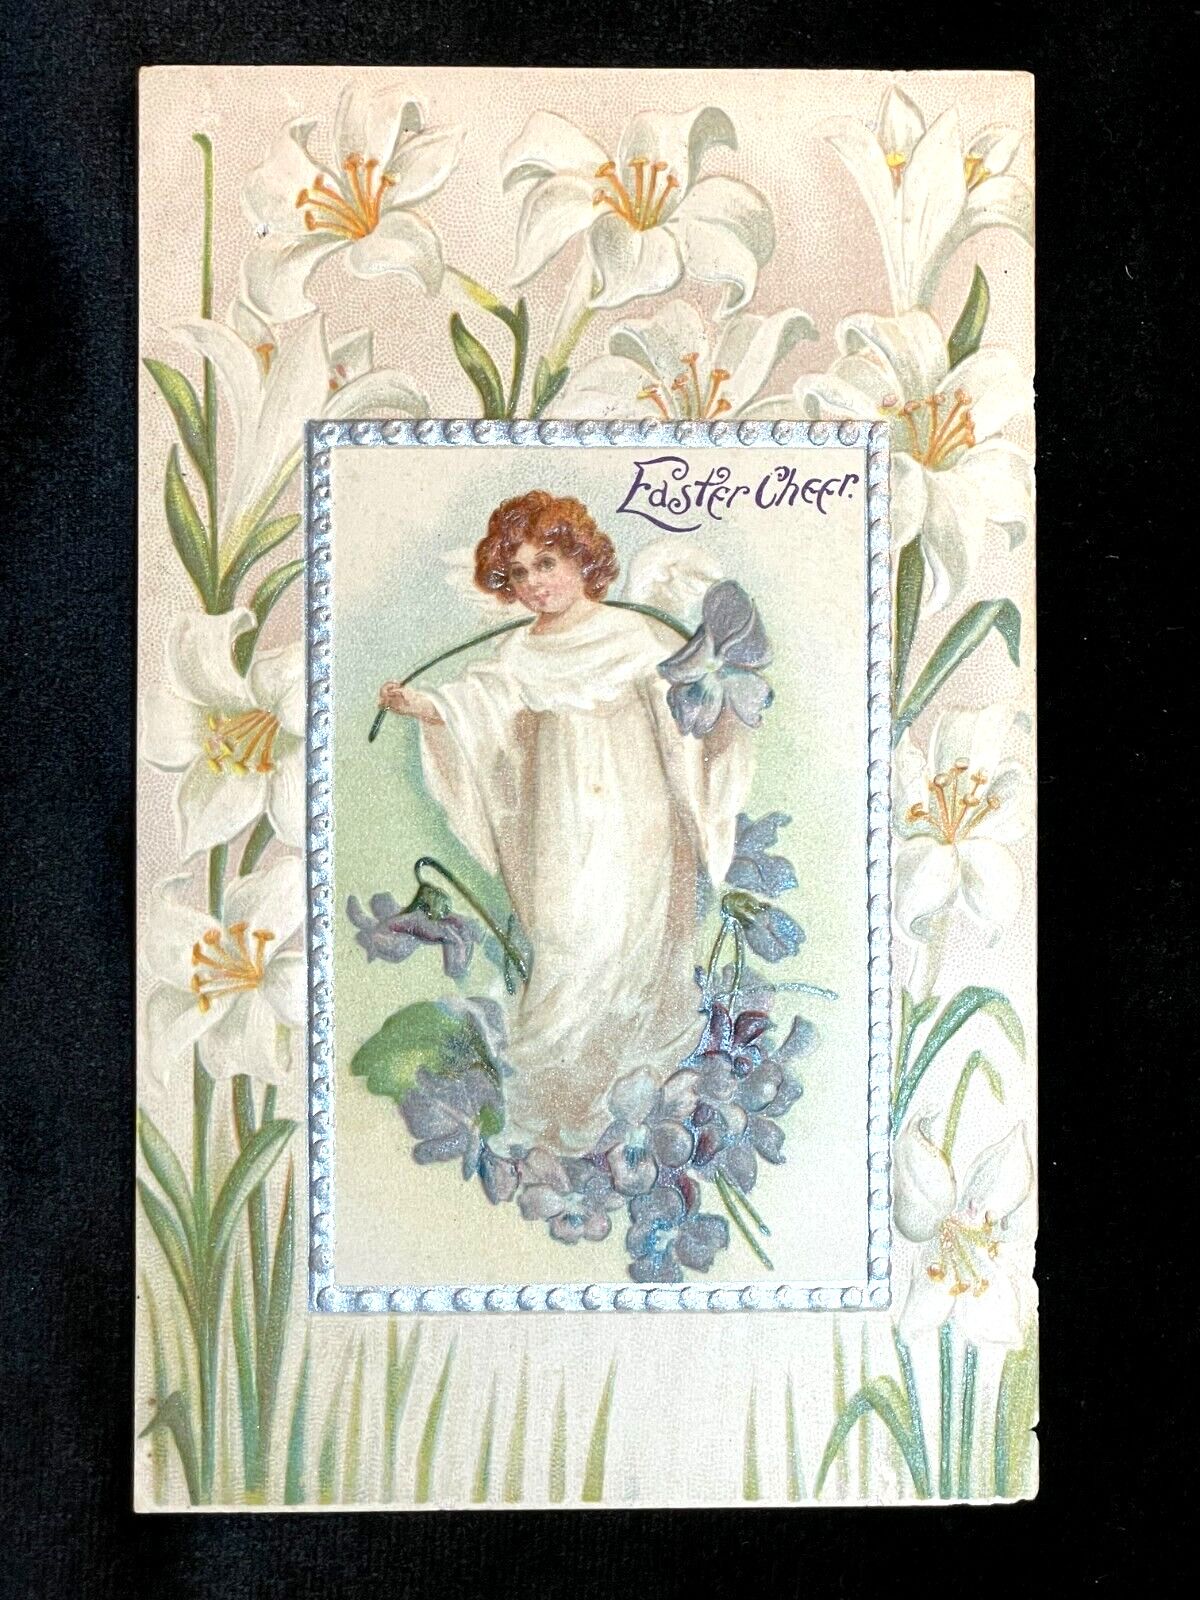 ANTIQUE EMBOSSED POSTCARD EASTER CHEER ANGEL WITH VIOLETS & LILIES SURROUNDING